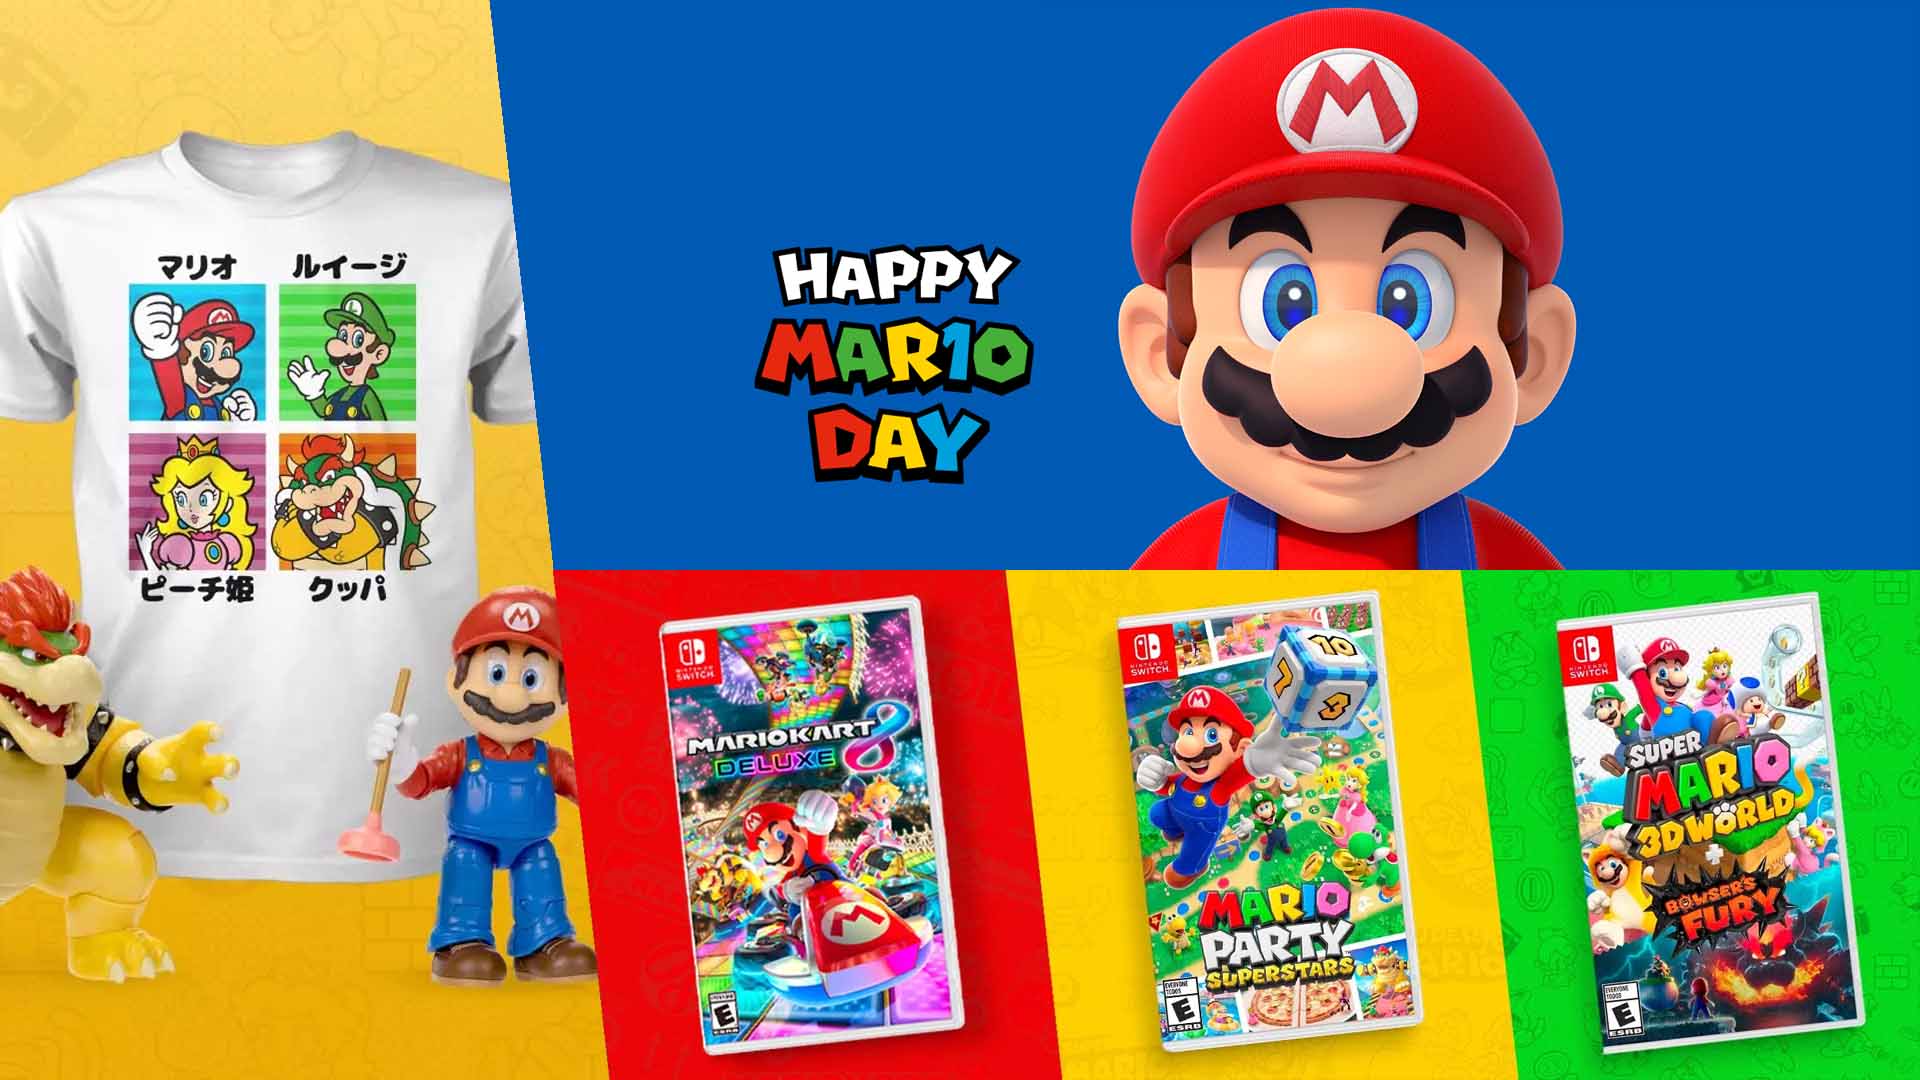 Guide MAR10 Day 2023 deals Nintendo Wire